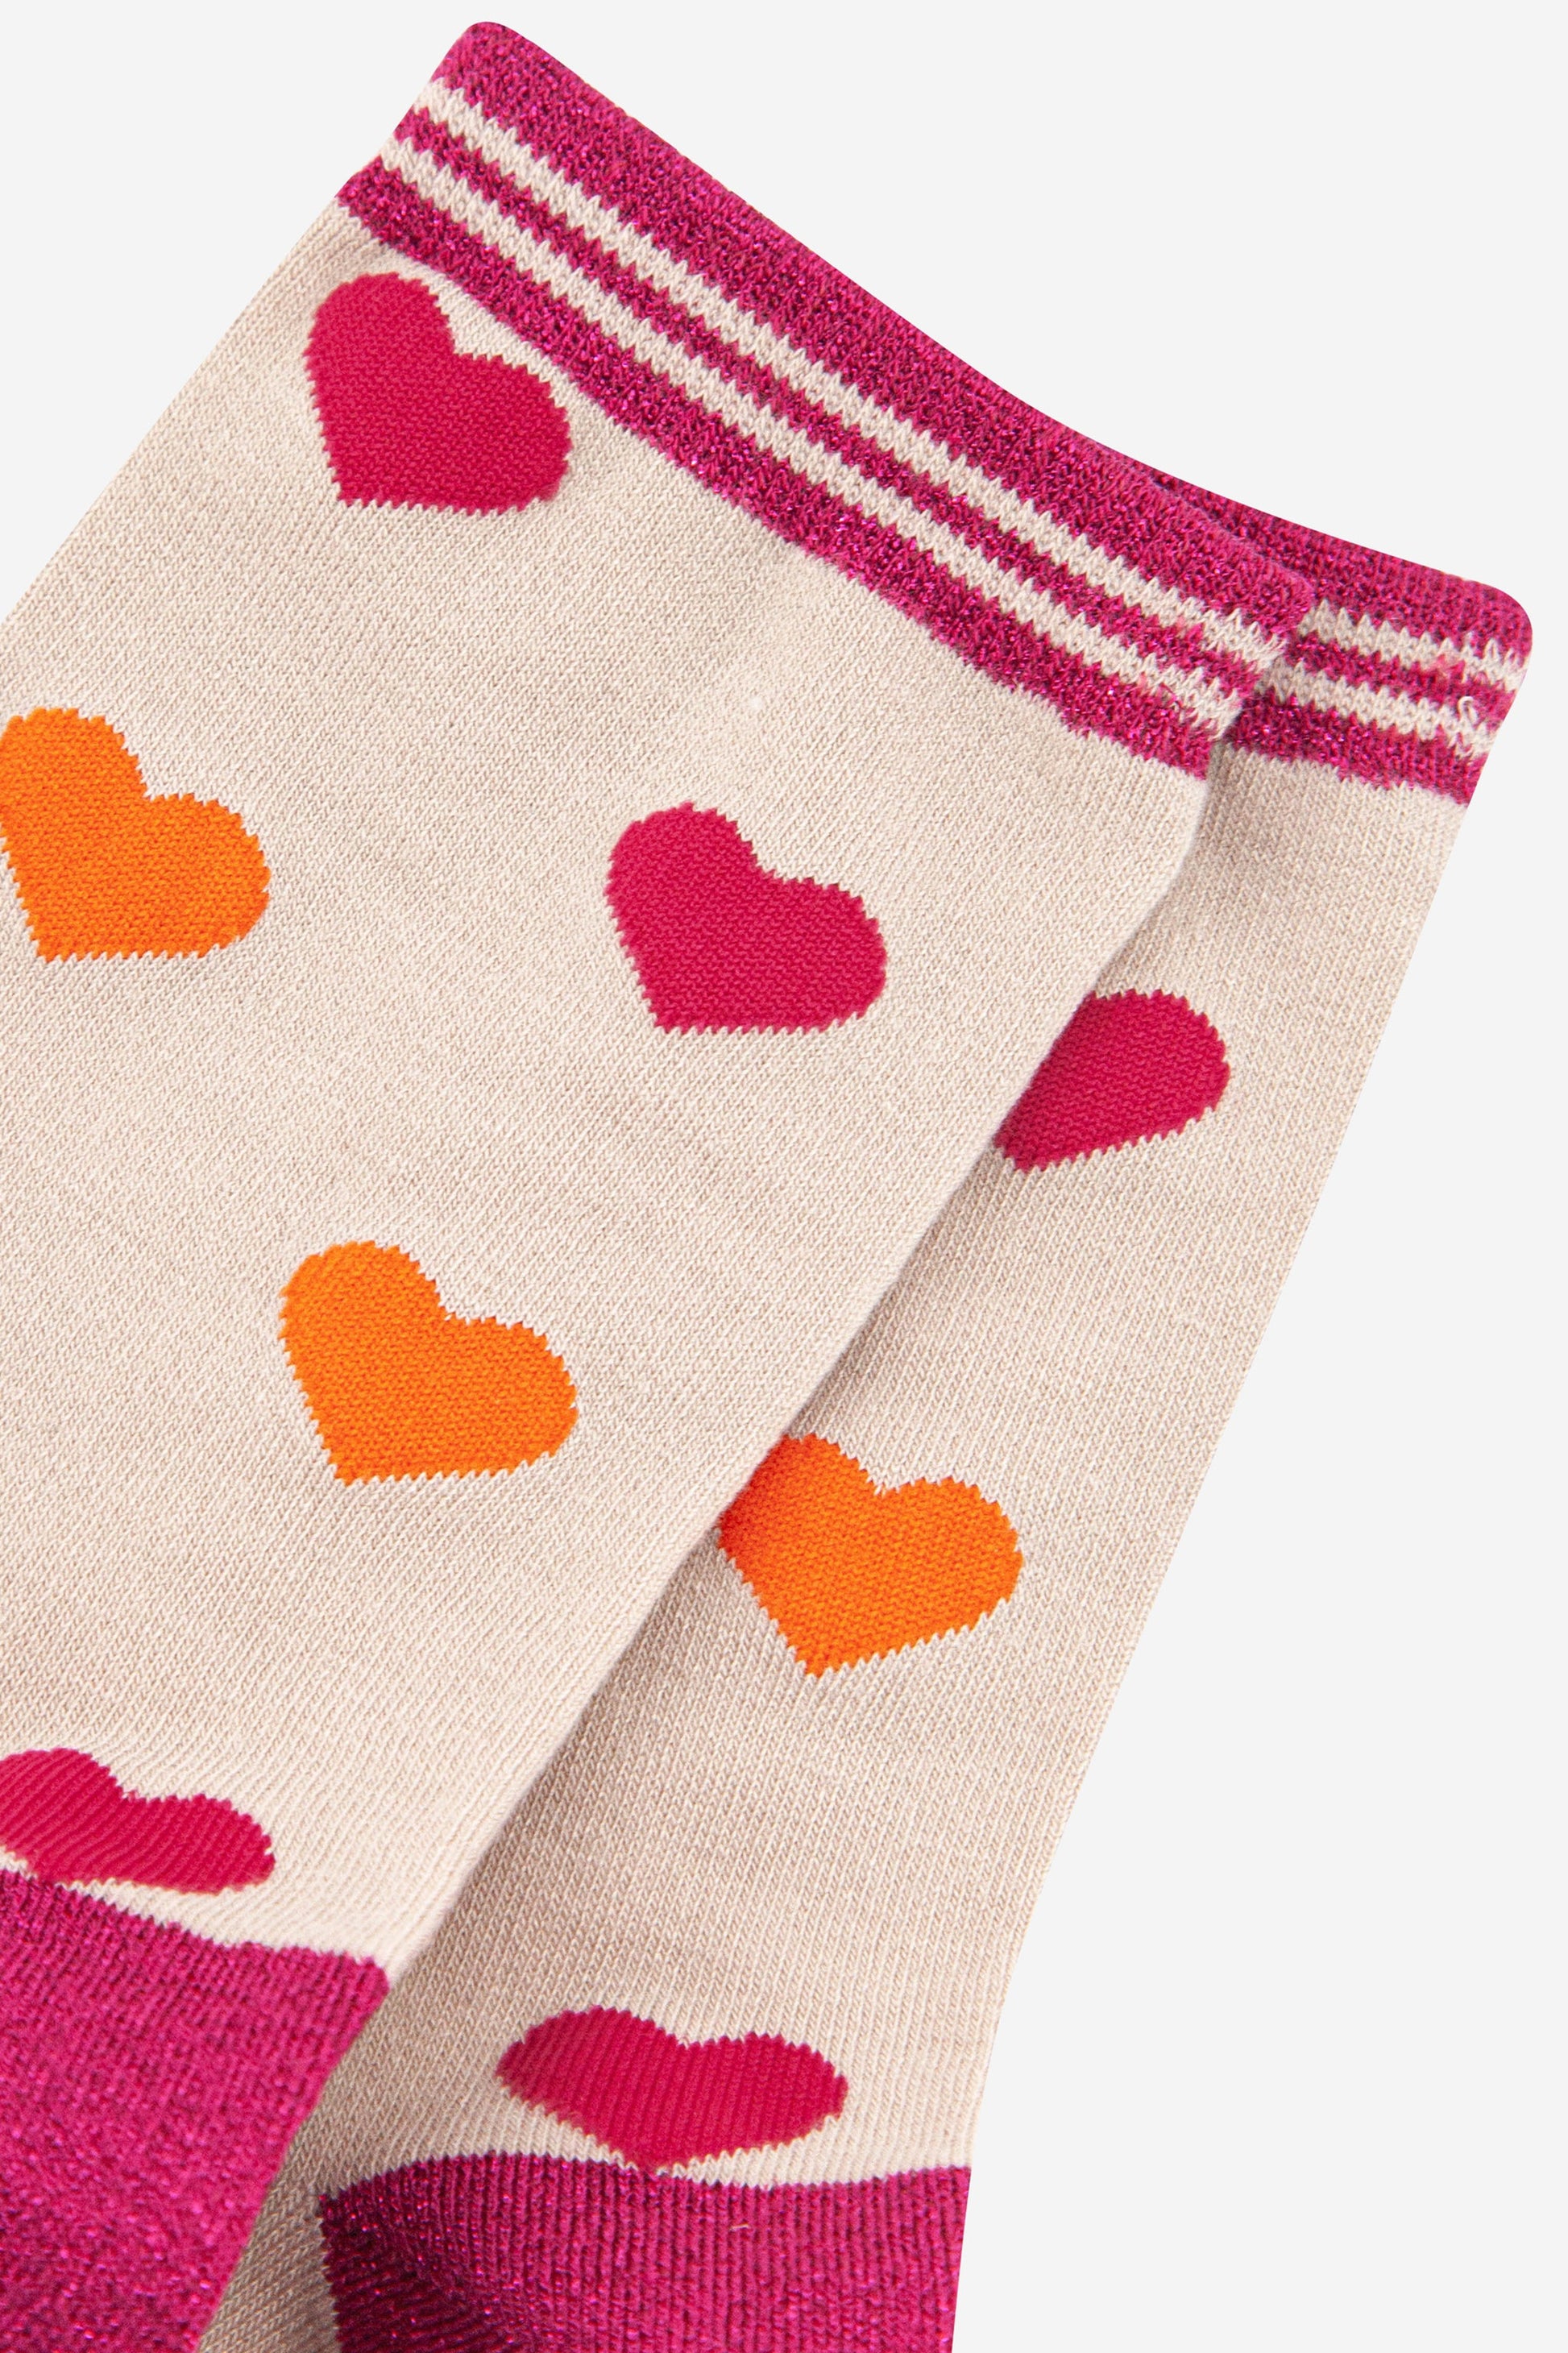 close up of the love heart pattern on the ankle socks